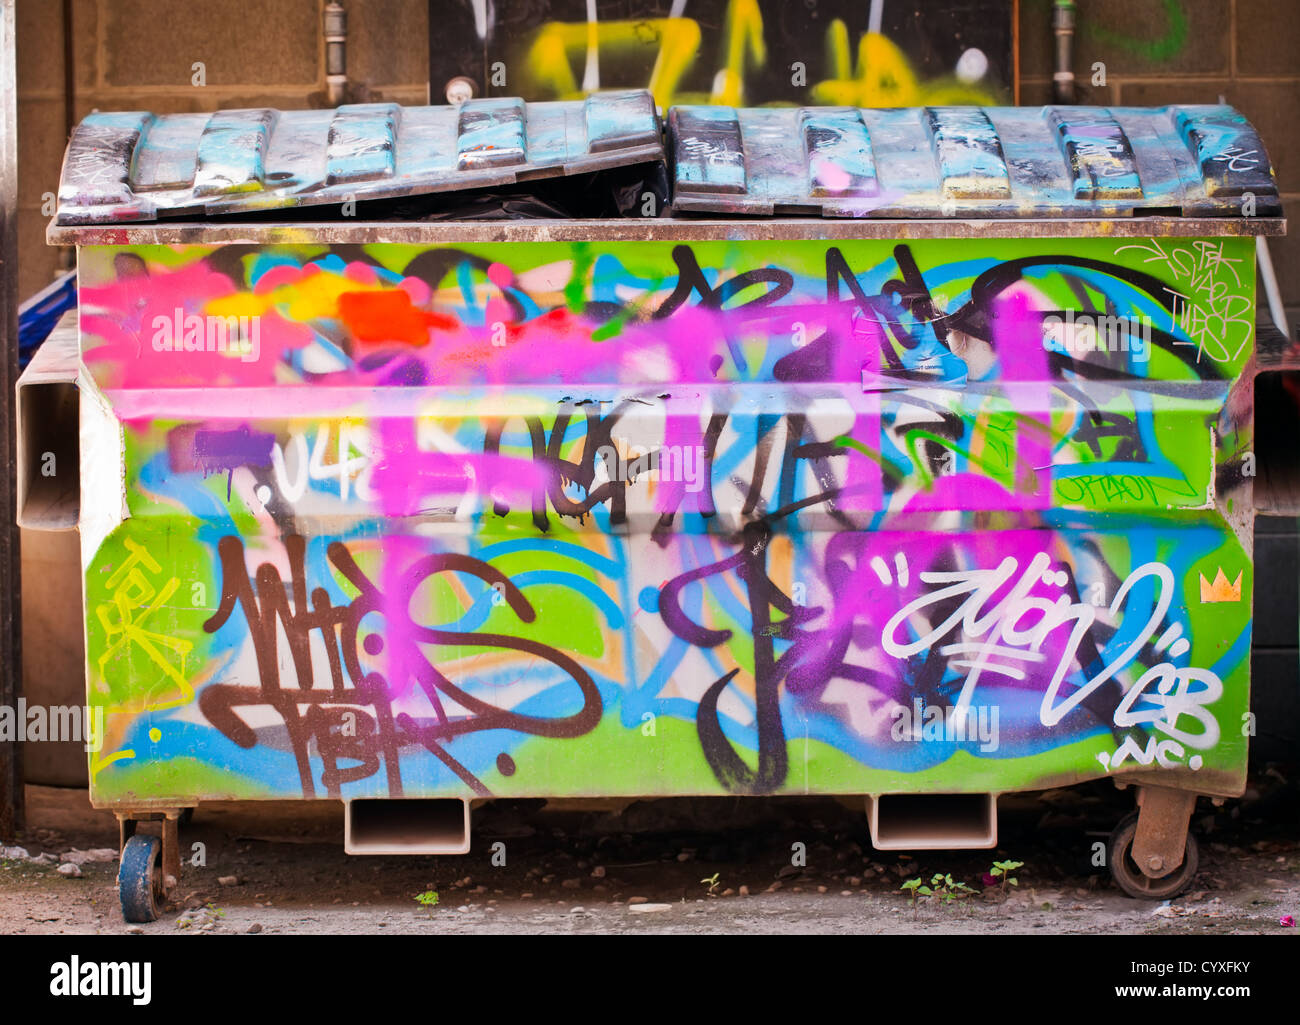 A rubbish bin or dumpster in an alley full of trash and covered in graffiti Stock Photo